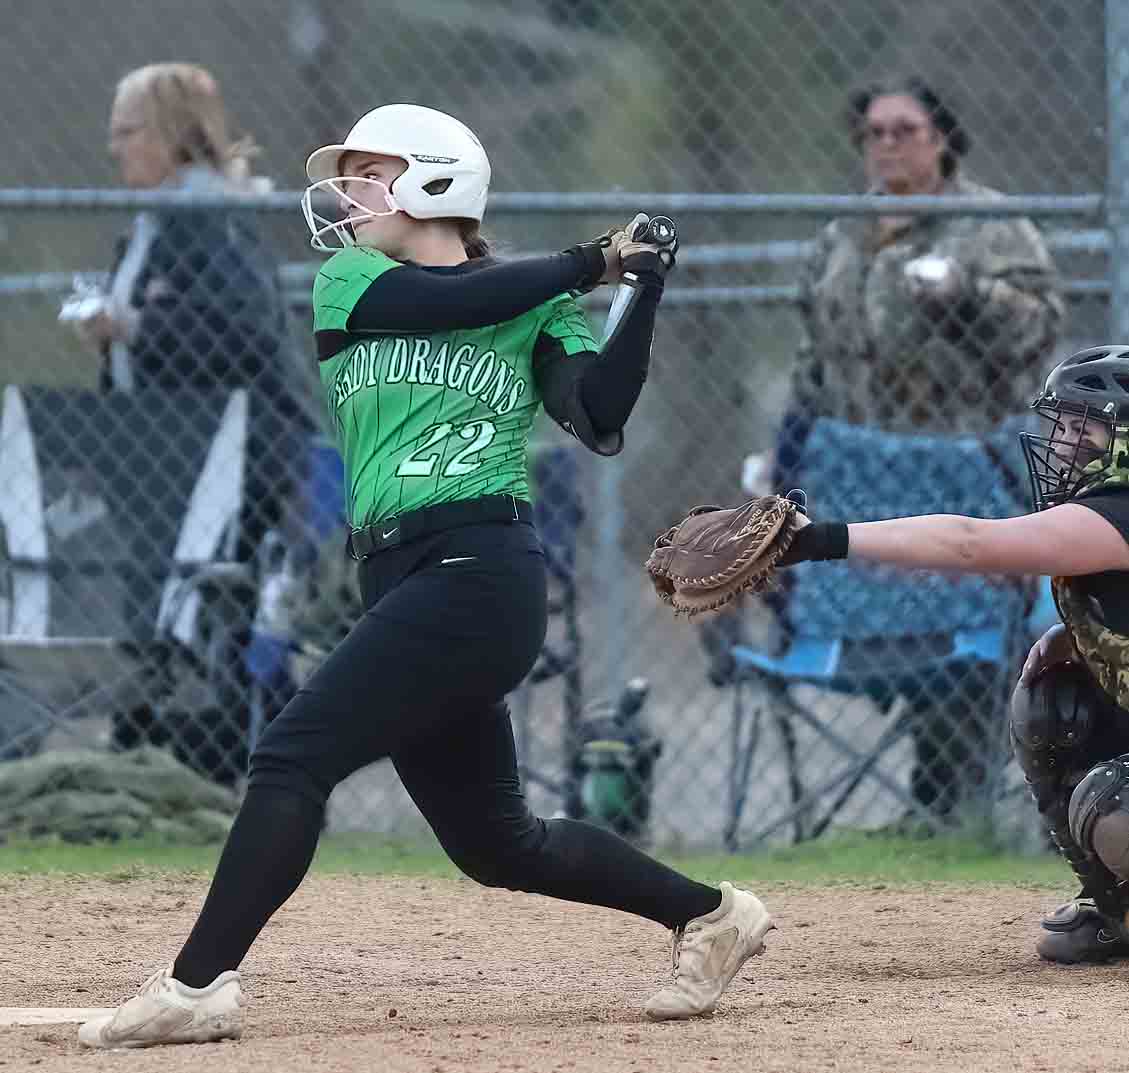 Junior third baseman Ella Lisenbee posted a .557 average last season that included 49 hits, seven homers, 28 RBI and 19 stolen bases in 21 attempts.